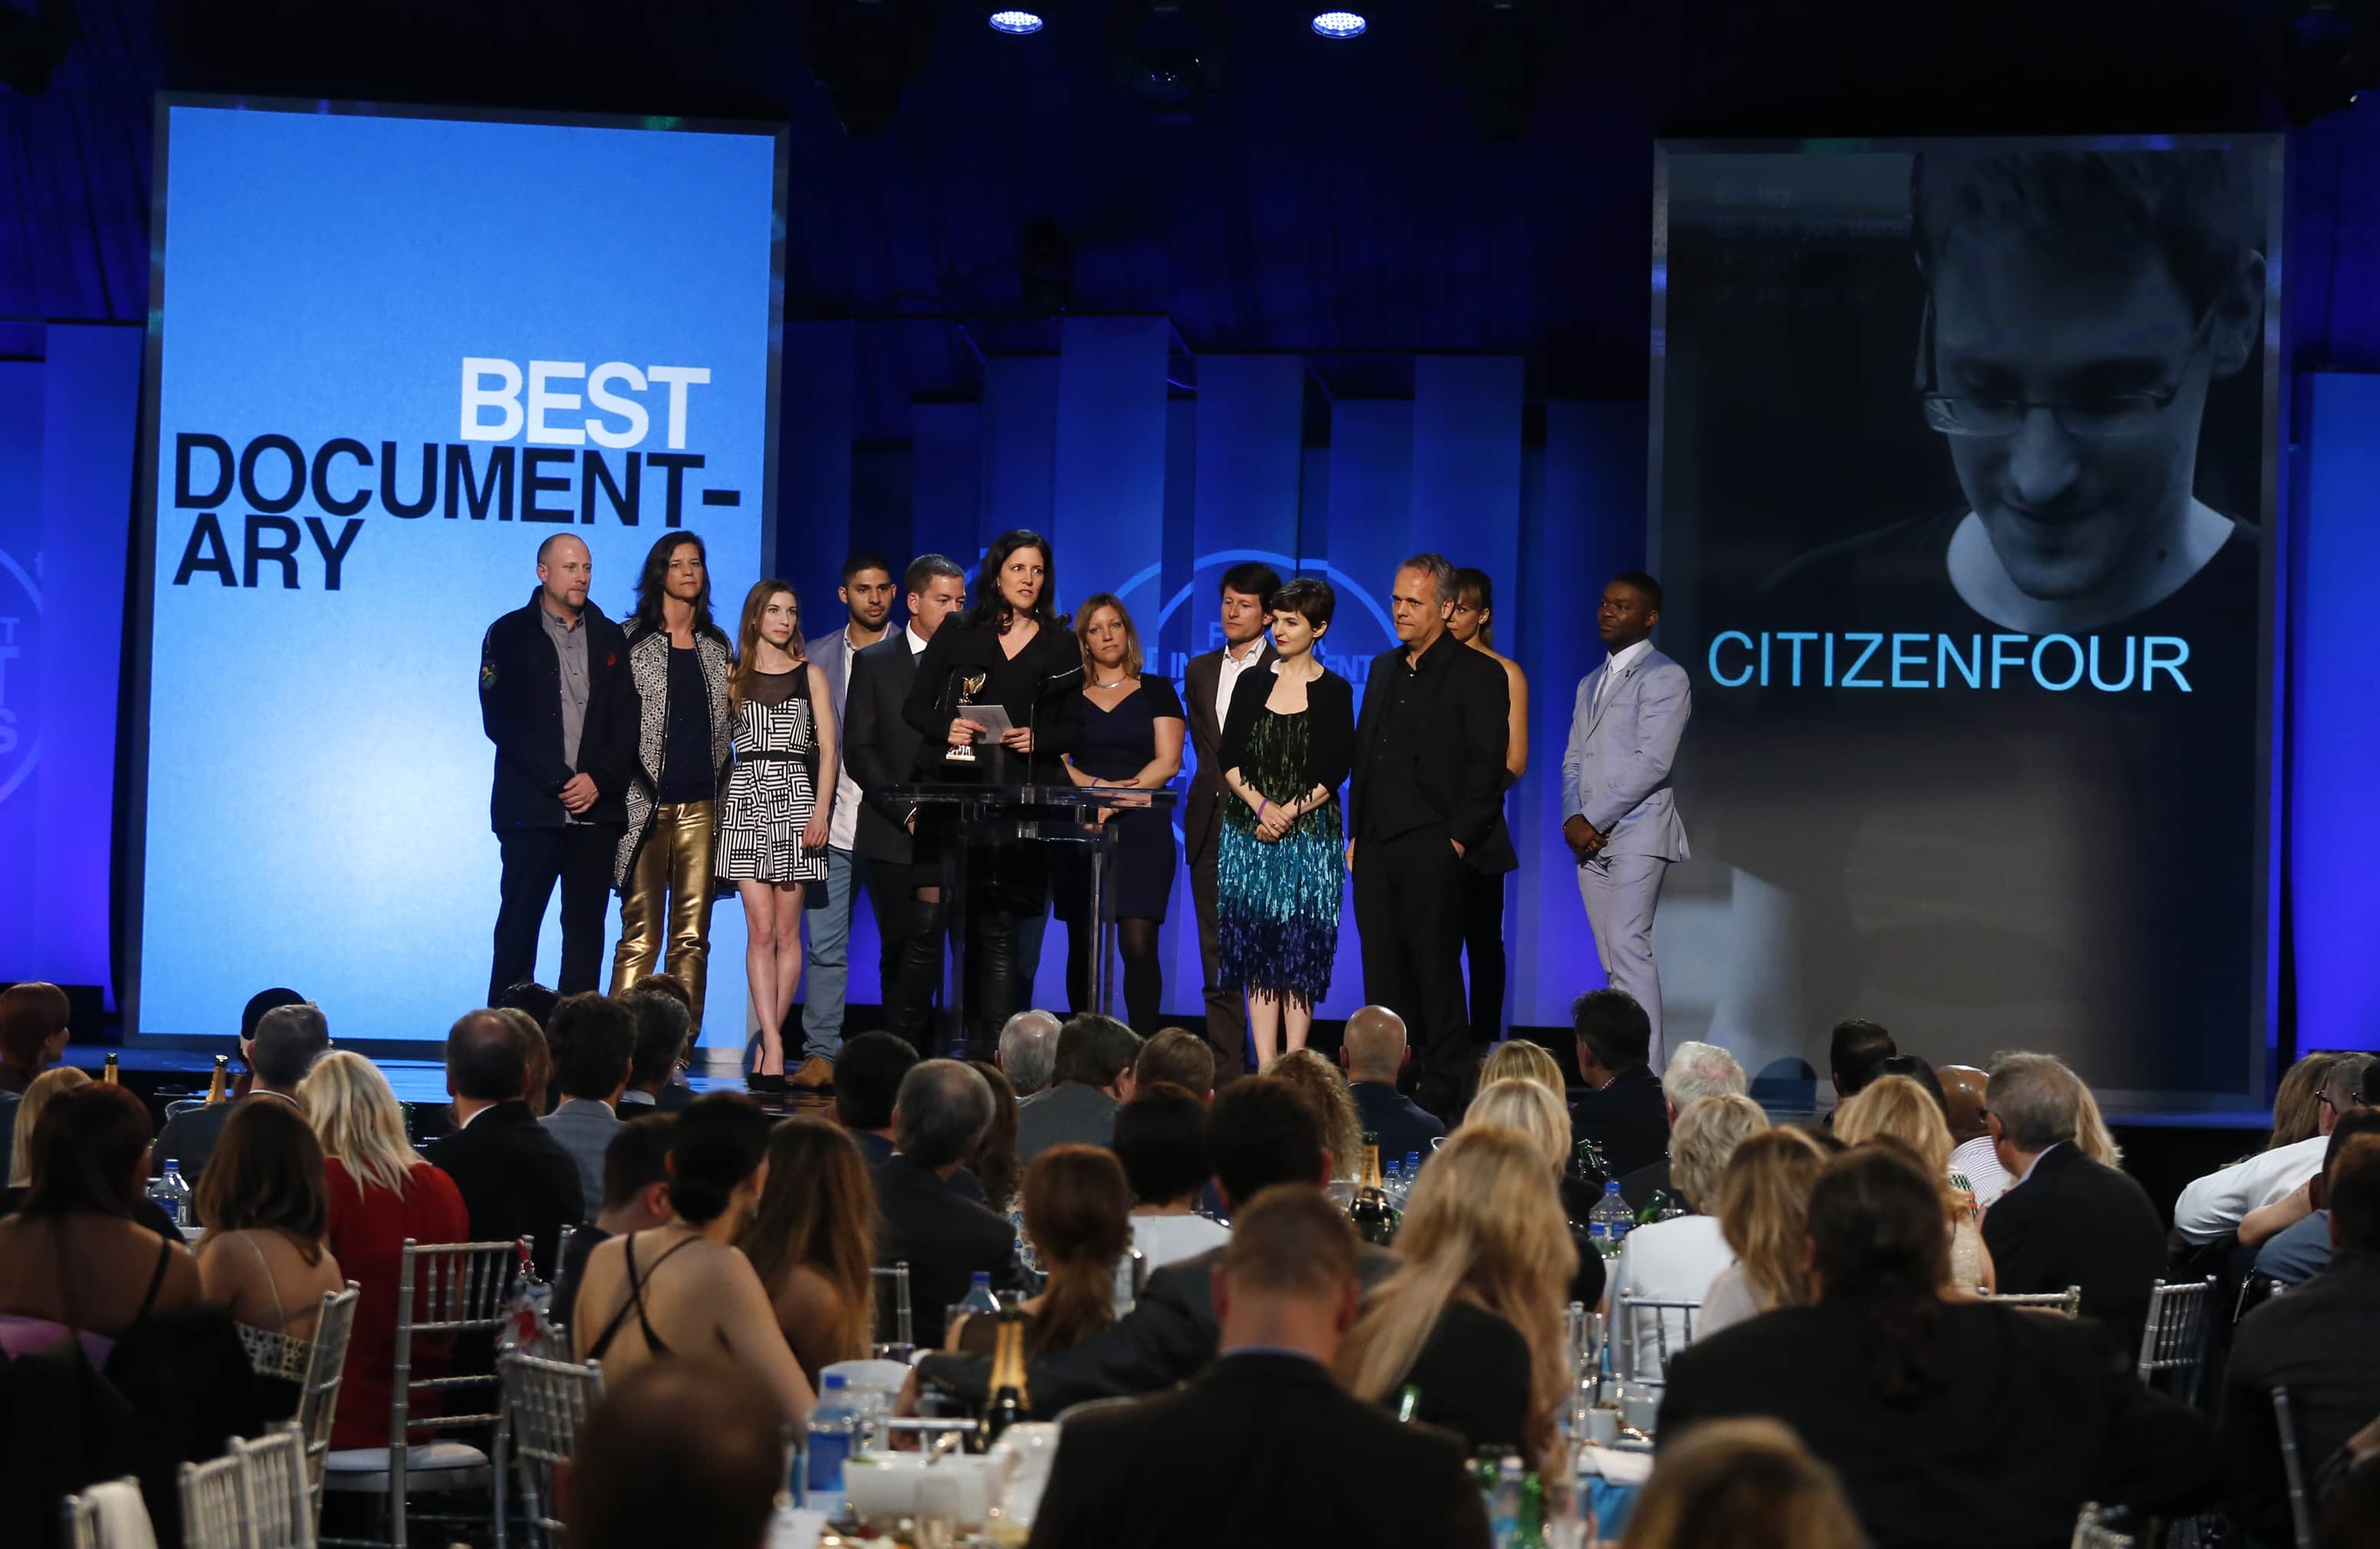 Director Laura Poitras (C) accepts the award for best documentary for her film "Citizenfour" at the 2015 Film Independent Spirit Awards in Santa Monica, California, 21 February 2015, REUTERS/Adrees Latif